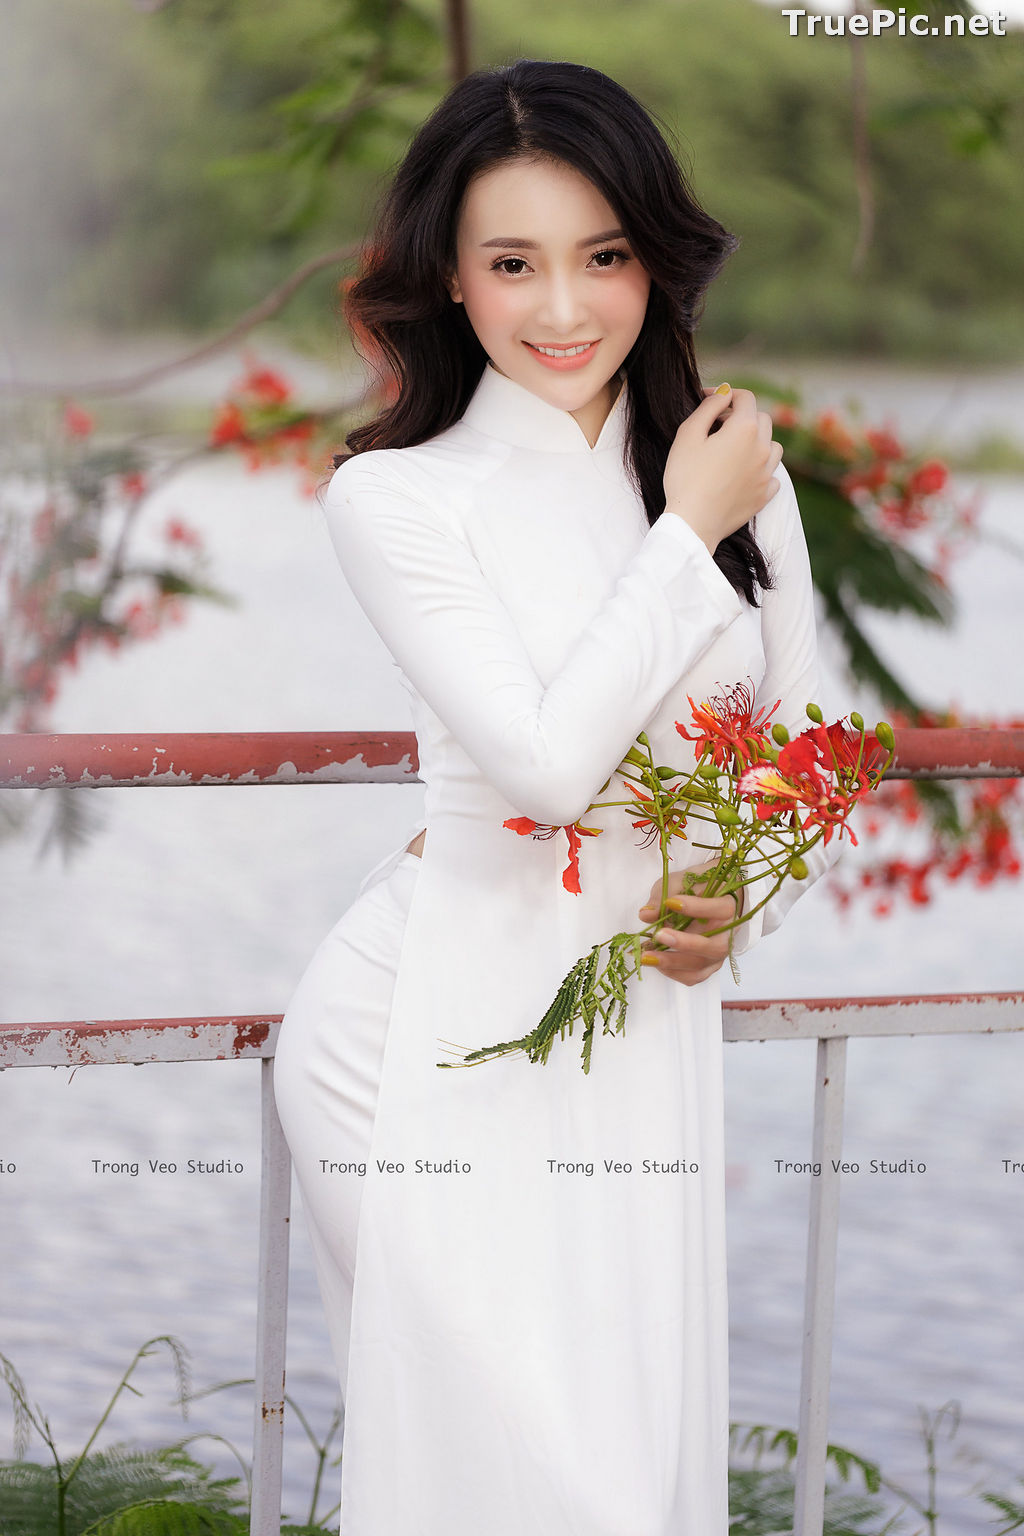 Image The Beauty of Vietnamese Girls with Traditional Dress (Ao Dai) #3 - TruePic.net - Picture-40